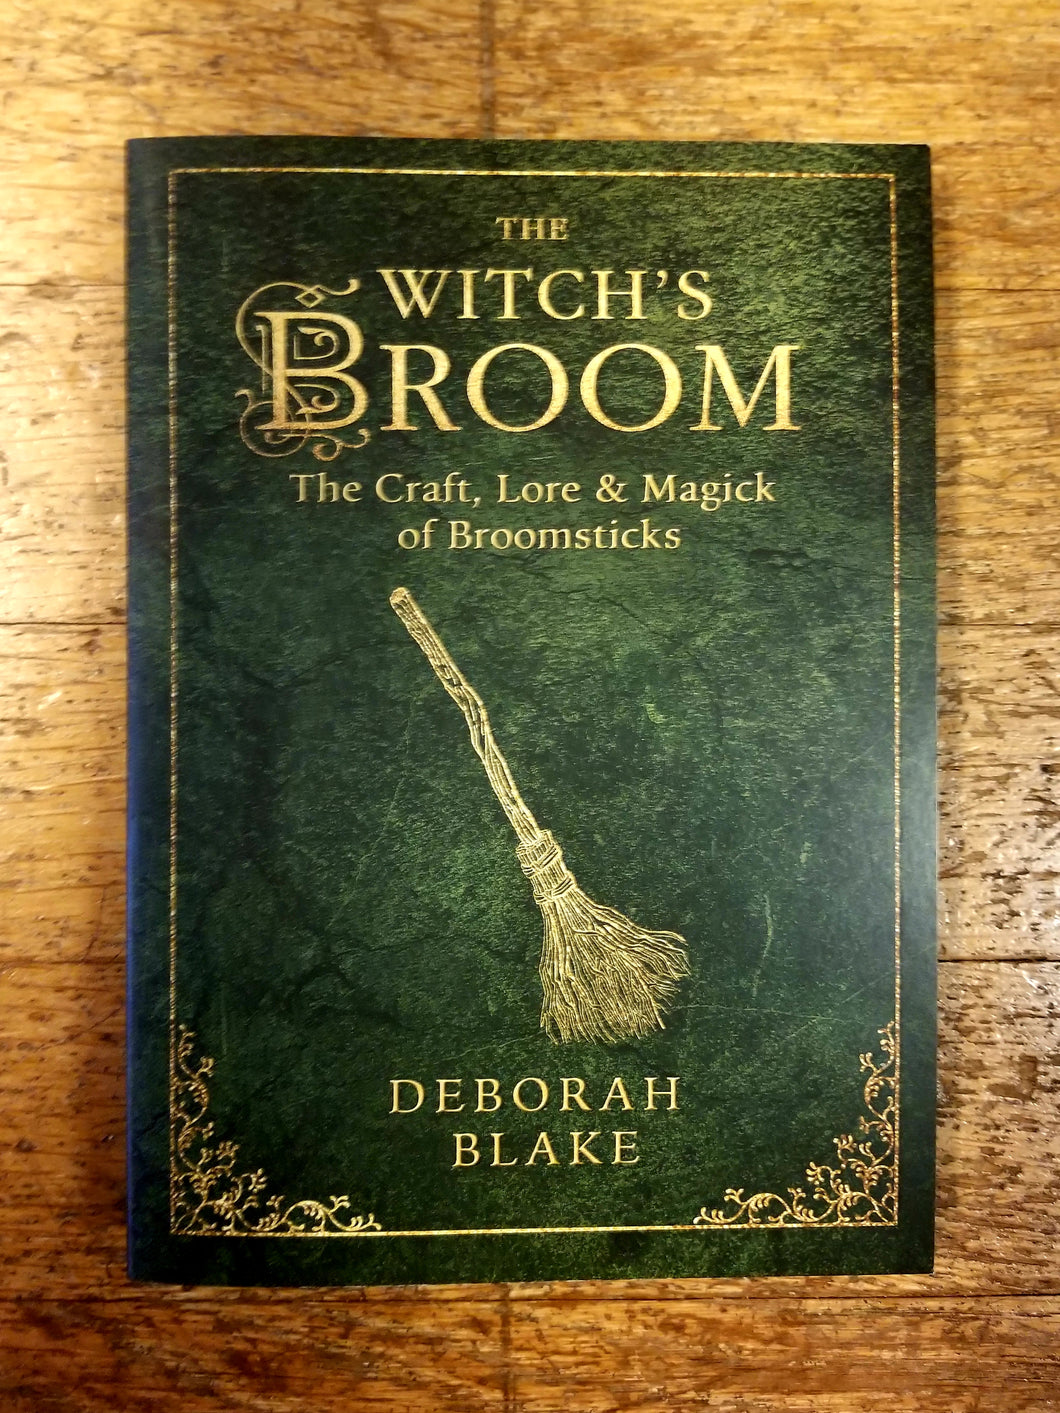 The Witch's Broom: The Craft, Lore & Magick of Broomsticks  by Deborah Blake